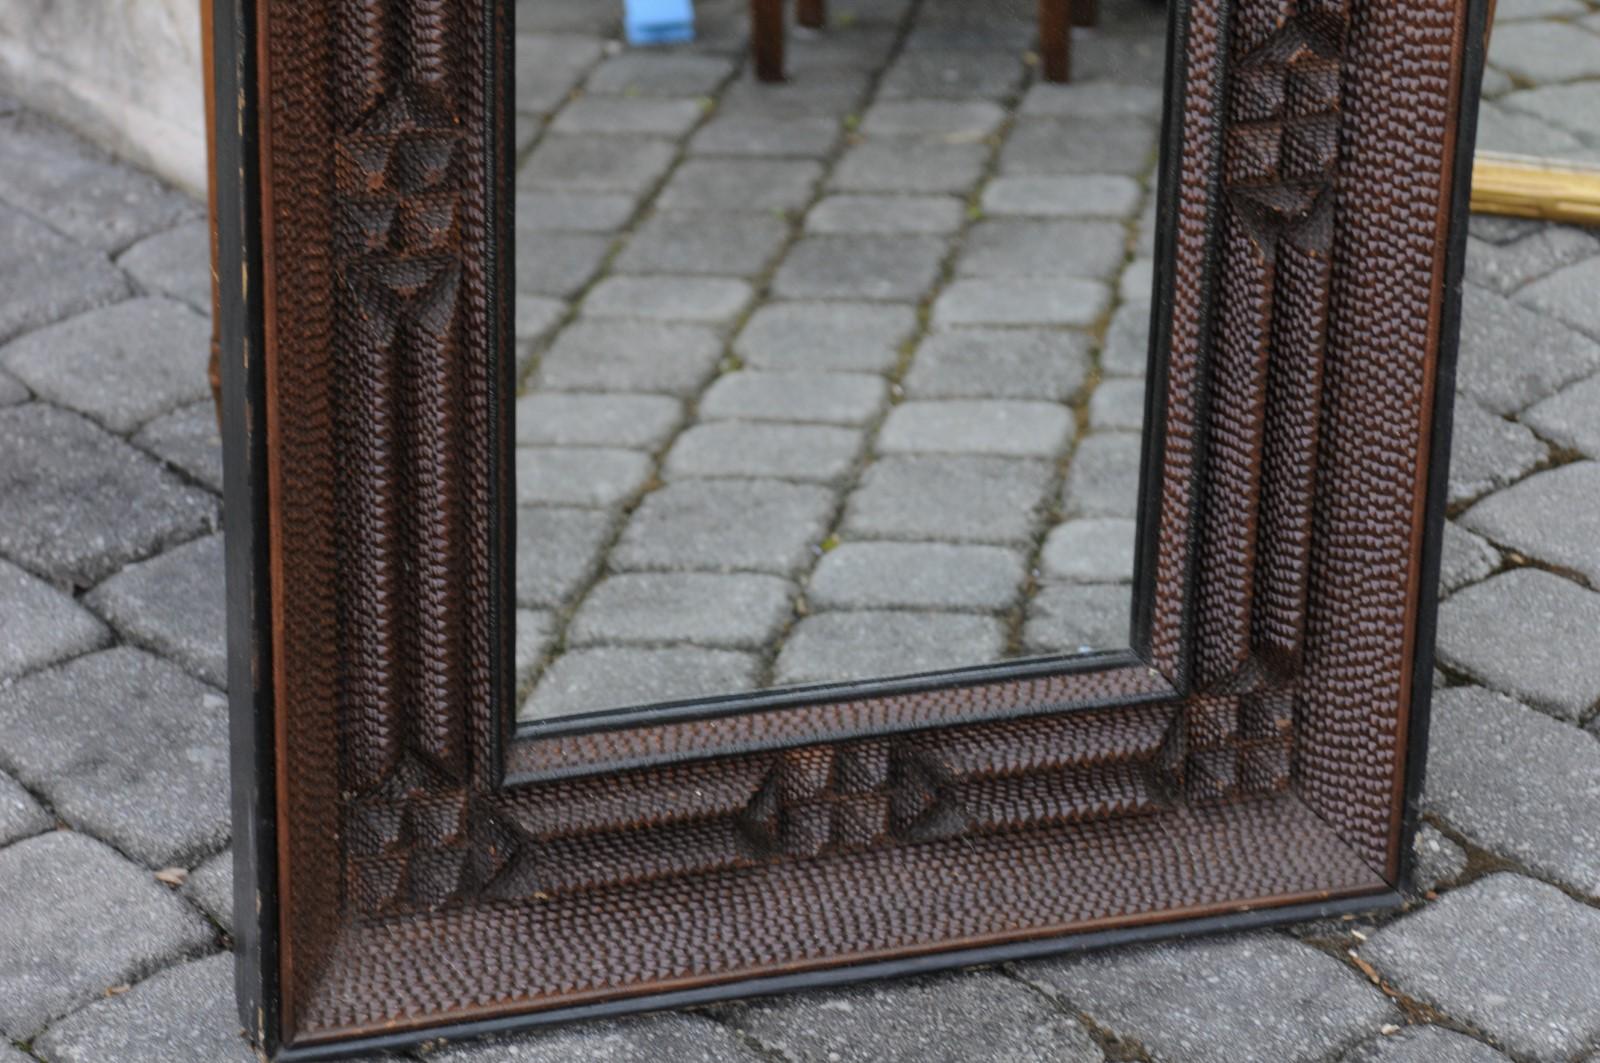 A French Tramp Art wall mirror from the early 20th century, with brown patina and textured motifs. Born in France during the turn of the century, this wall mirror features a rectangular beveled frame, adorned with the typical Tramp Art touch made of